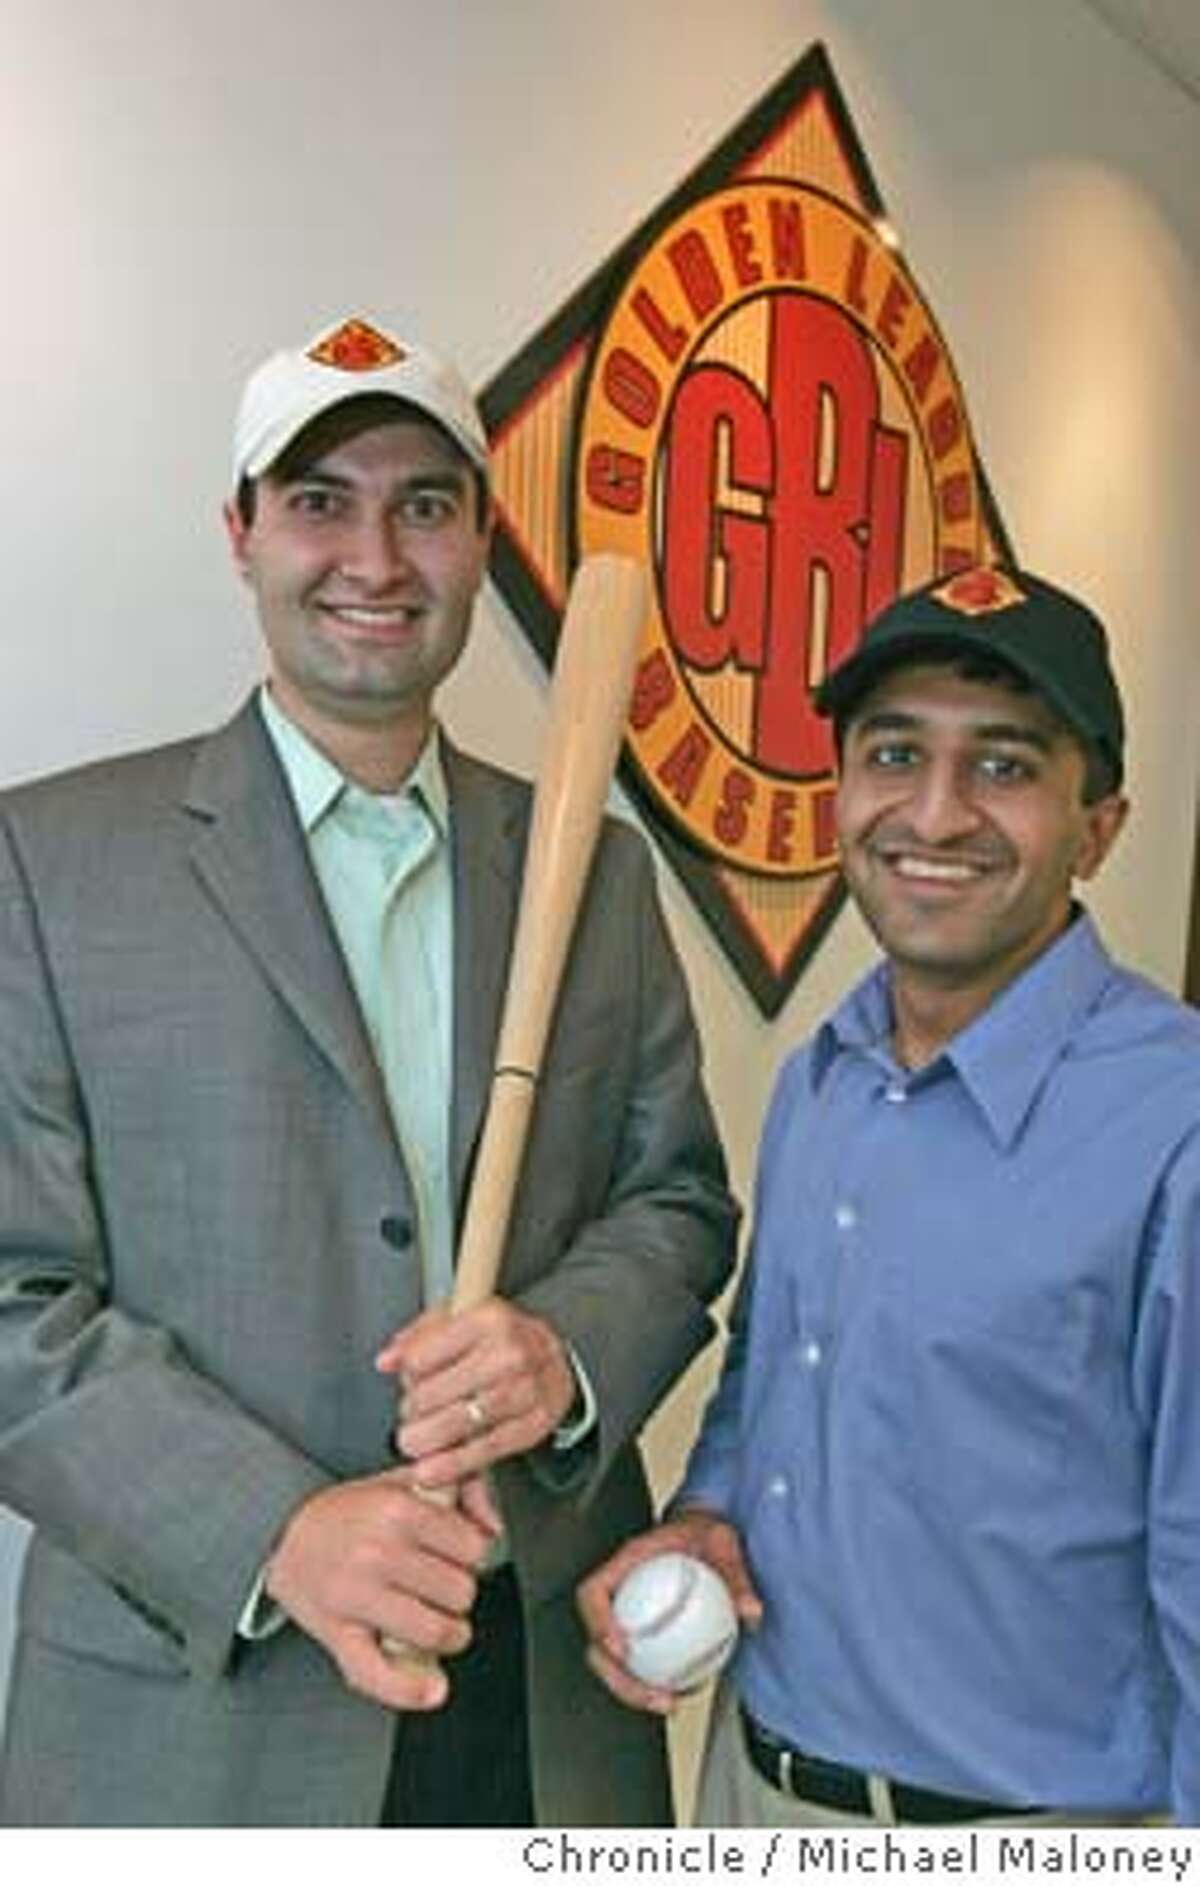 At left, David Kaval, Founder & CEO, right, Amit Patel, Founder and President of the new Pleasanton based Golden League. The Golden League is a new professional baseball league at the class-A level. The League will play a 90 game season in California and western Arizona starting in June 2005. Photo by Michael Maloney / San Francisco Chronicle